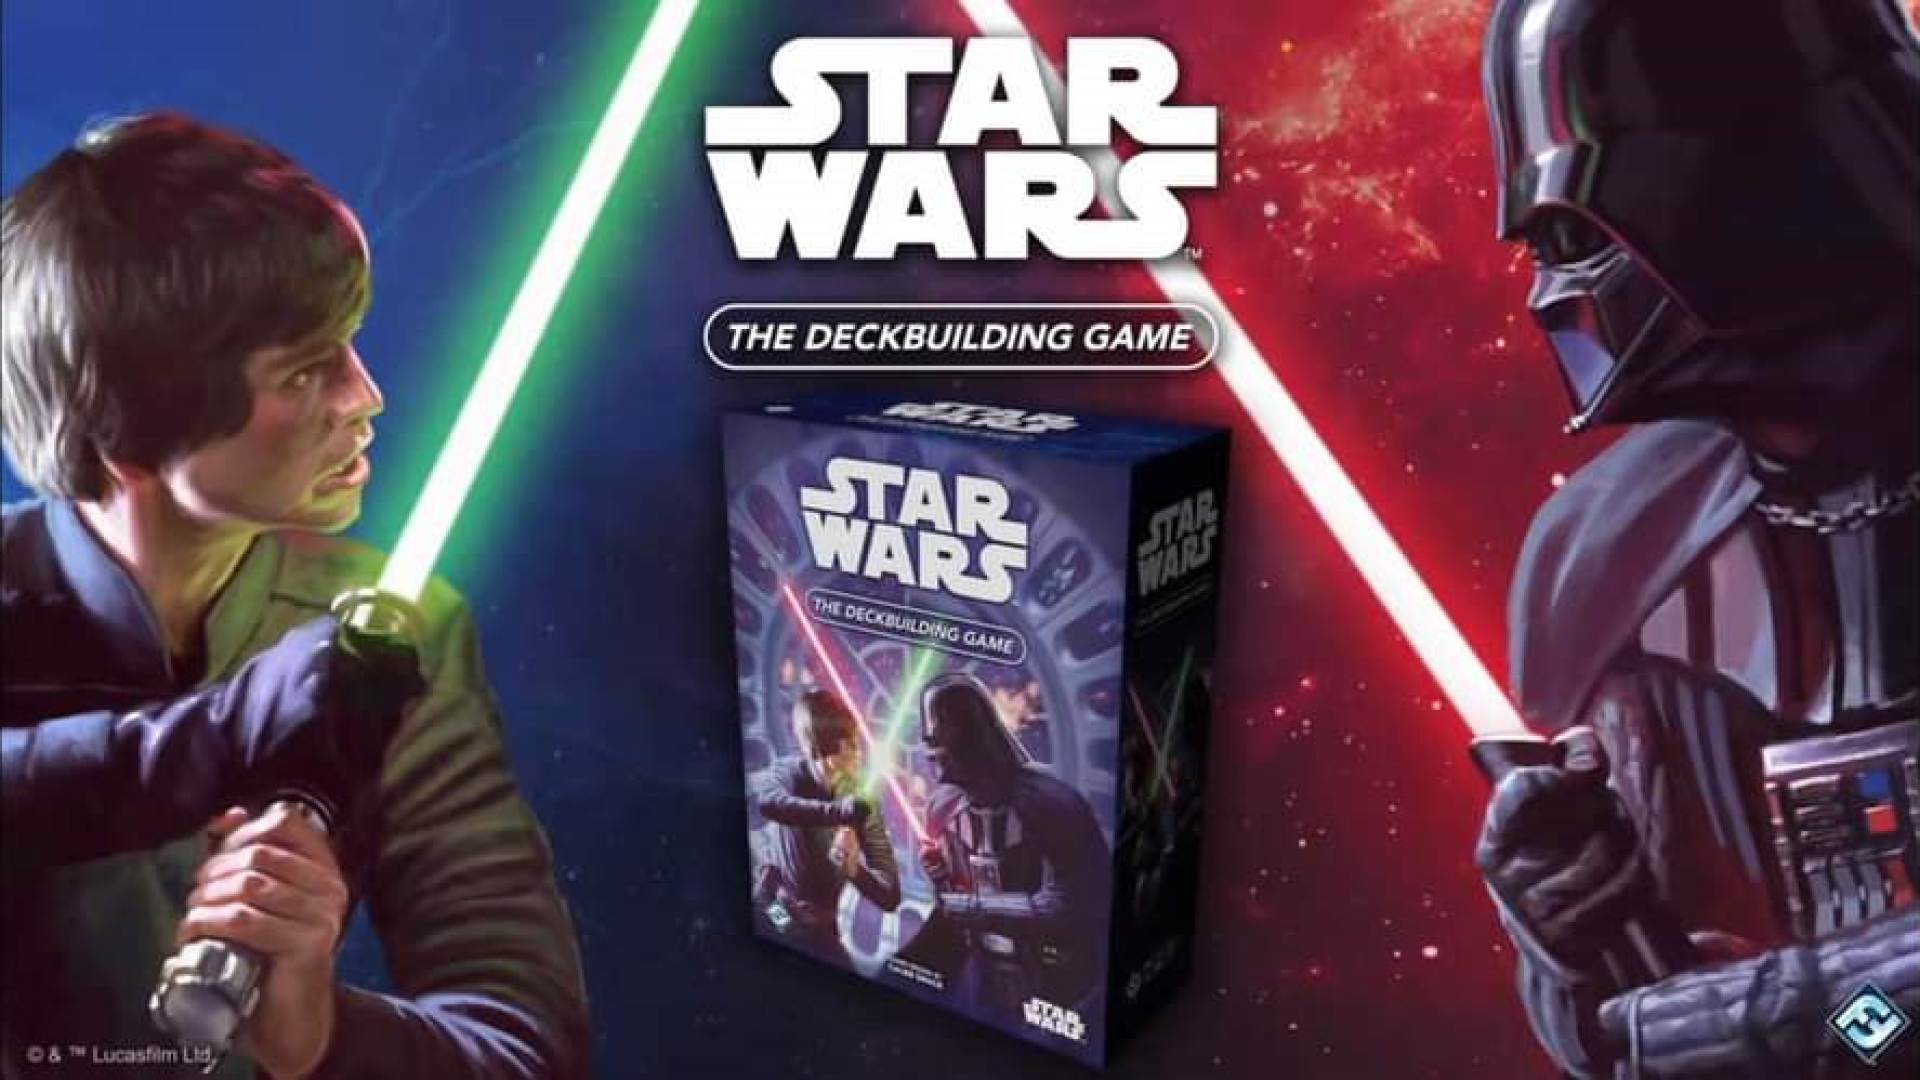 Luke Skywalker and Darth Vader face each other with lightsabers drawn across a mockup for the upcoming competitive Star Wars deckbuilding game.